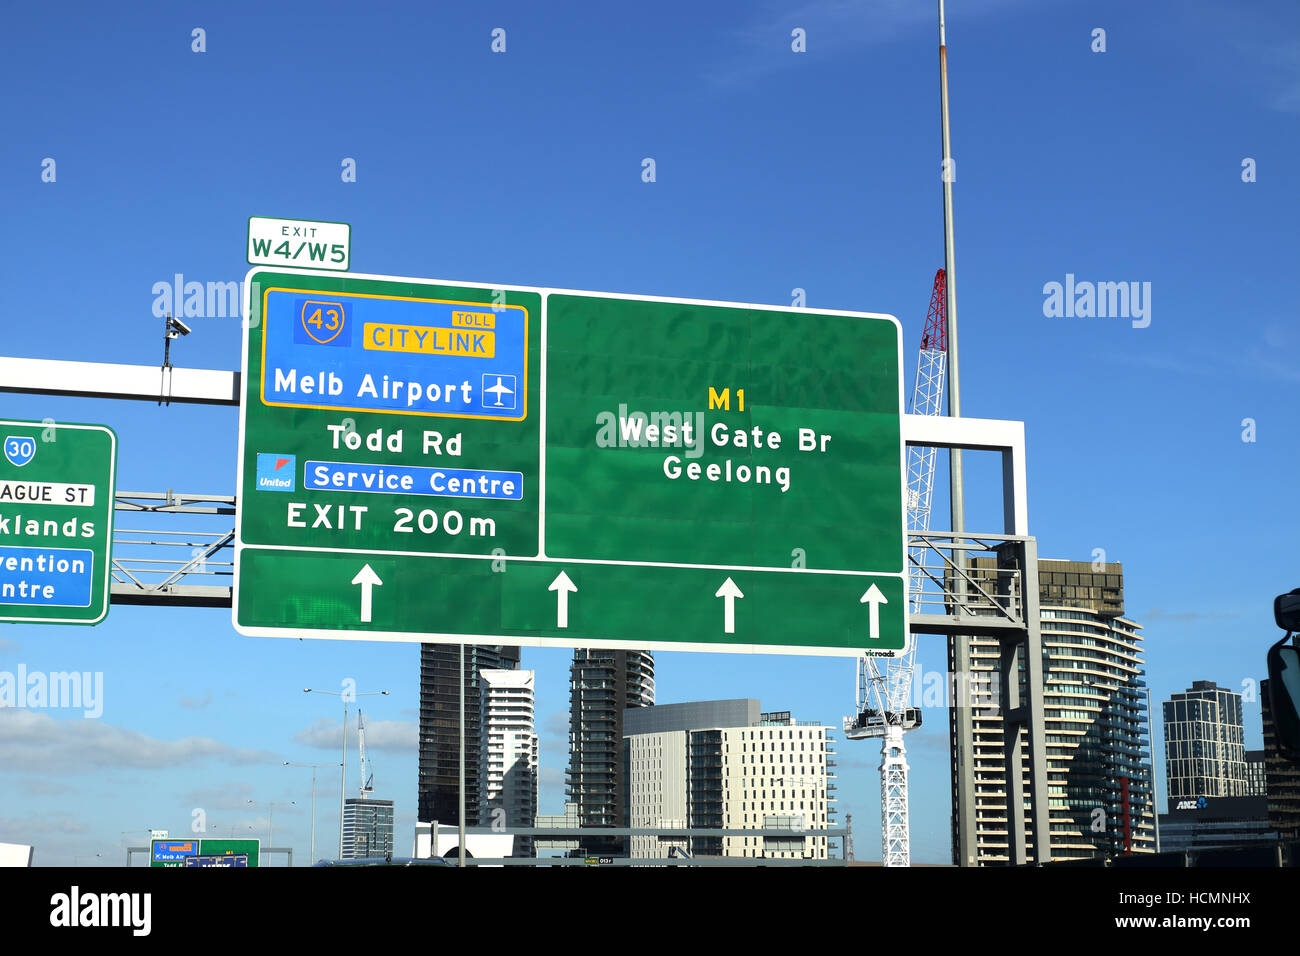 Road sign boards to Melbourne airport, Geelong, West Gate Bridge and Stock Photo: 128304454 - Alamy